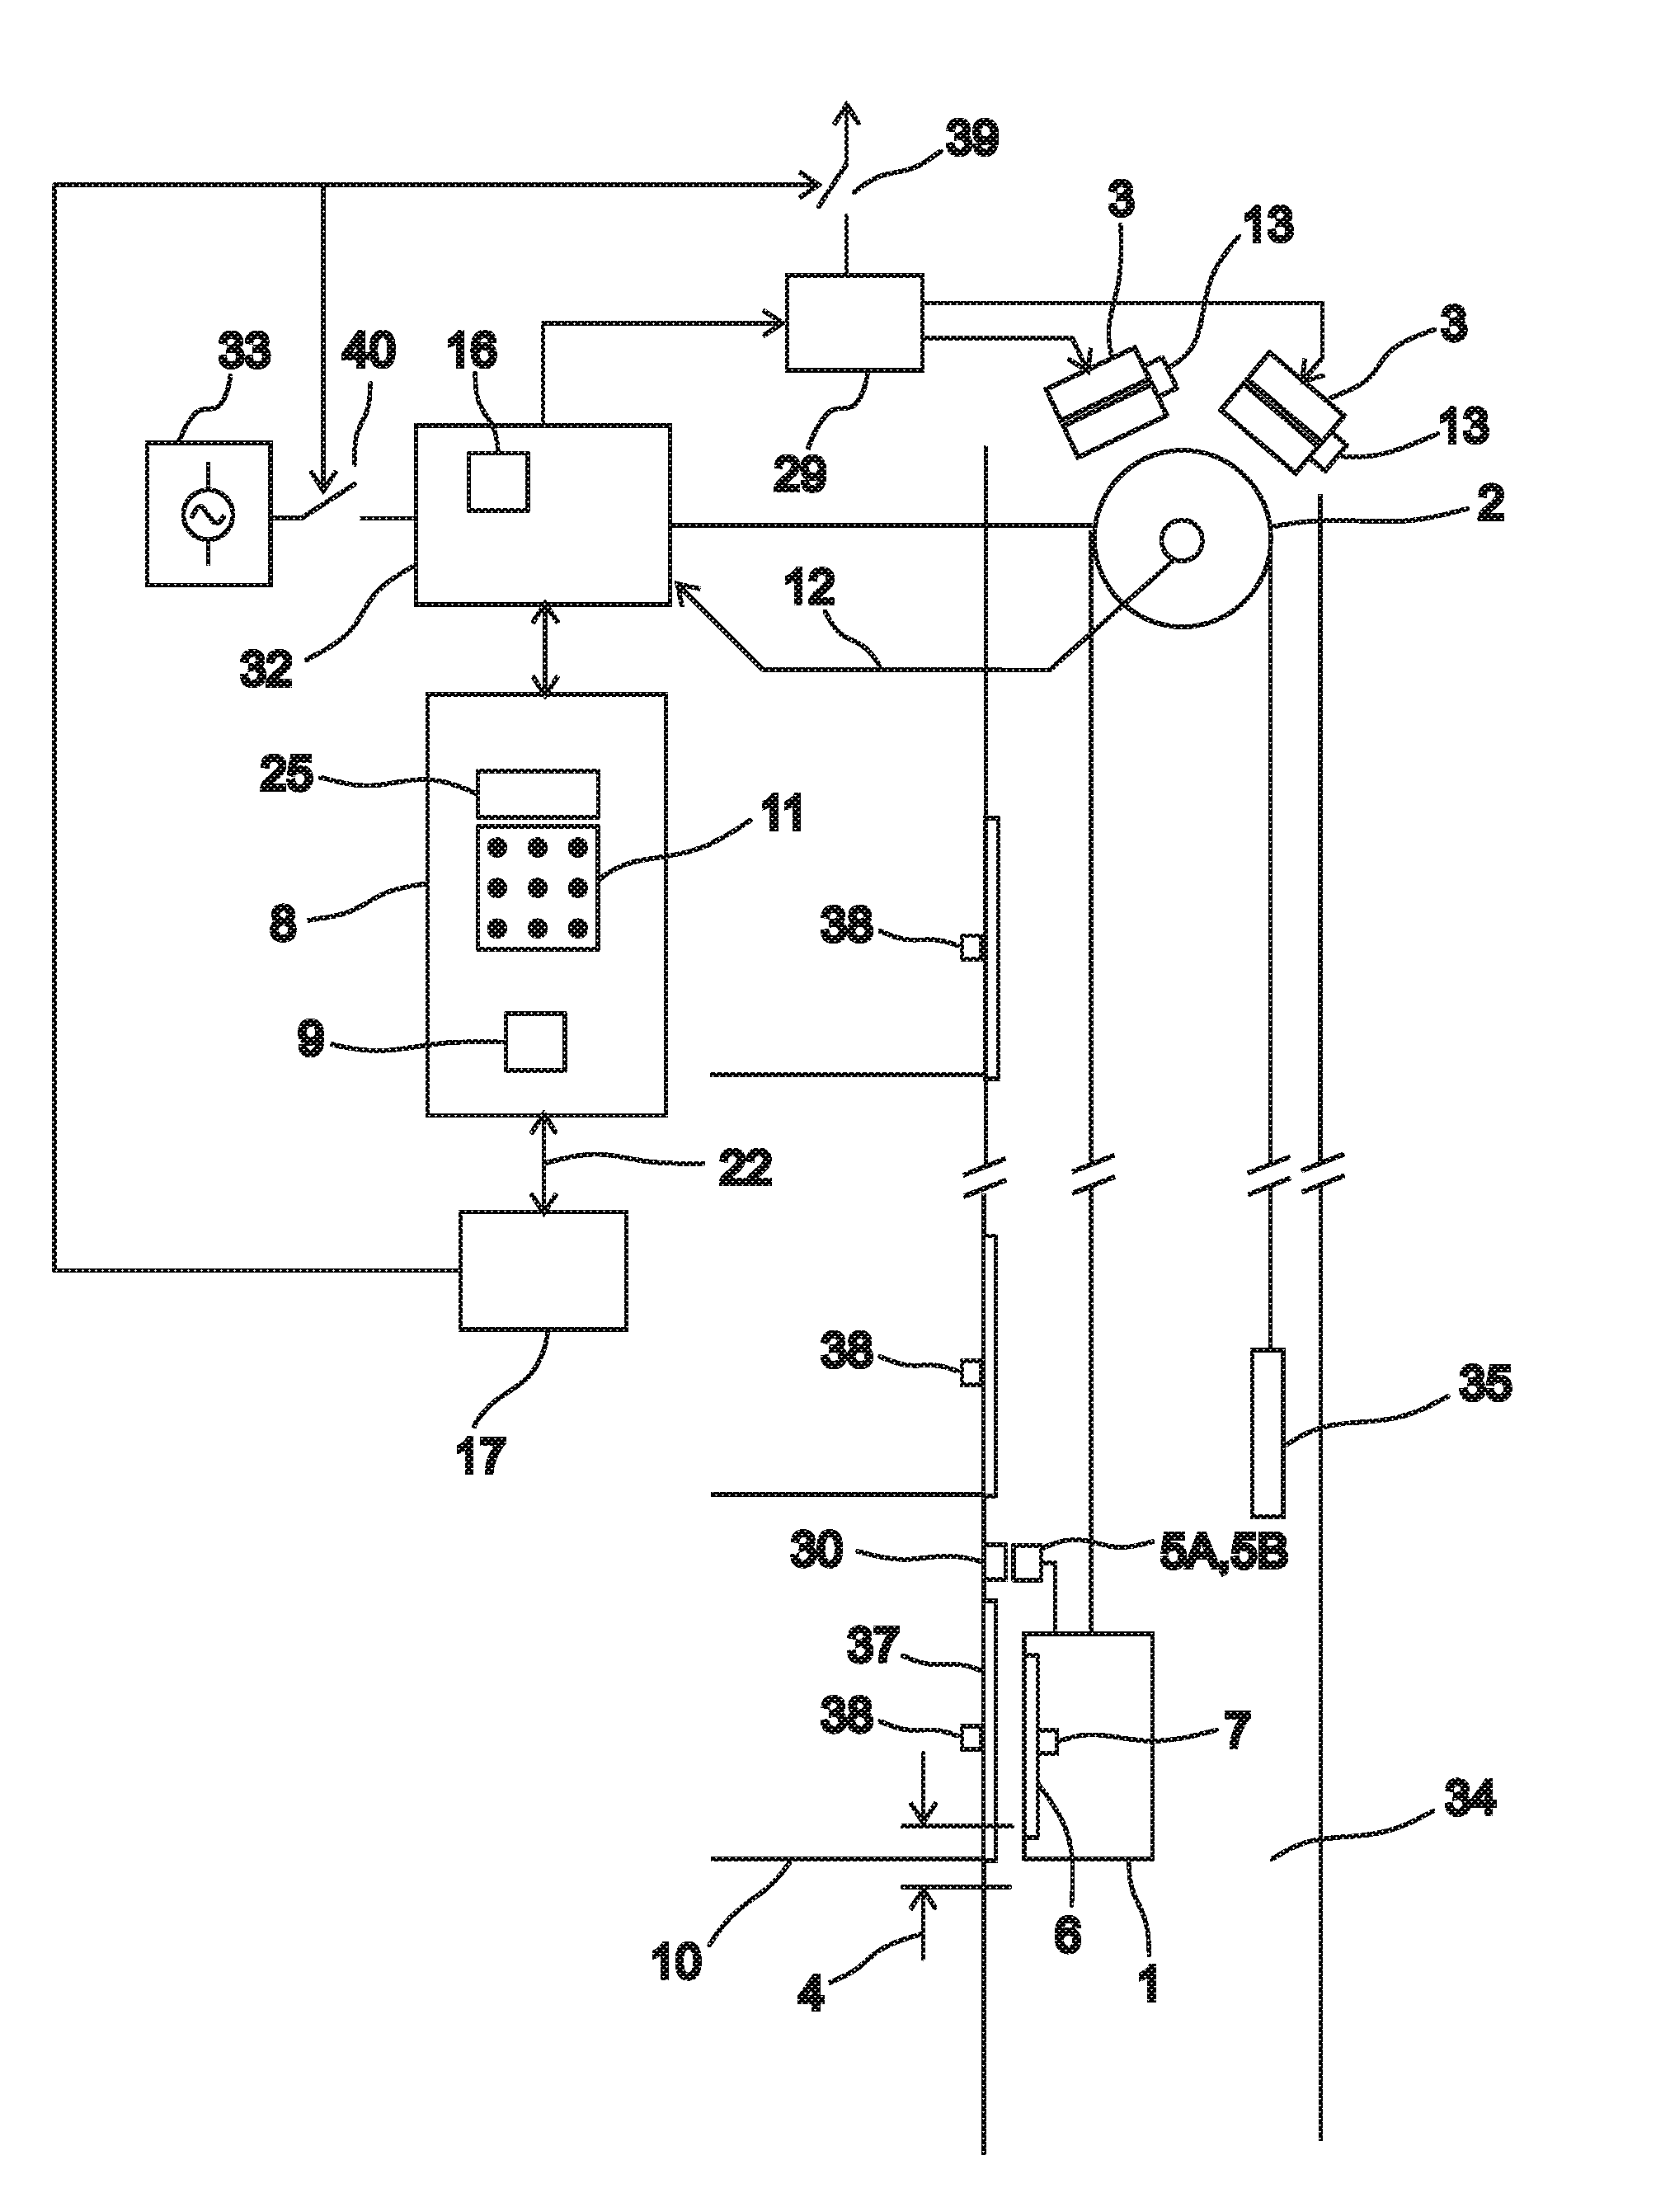 Method and arrangement for preventing the unintended movement of an elevator car